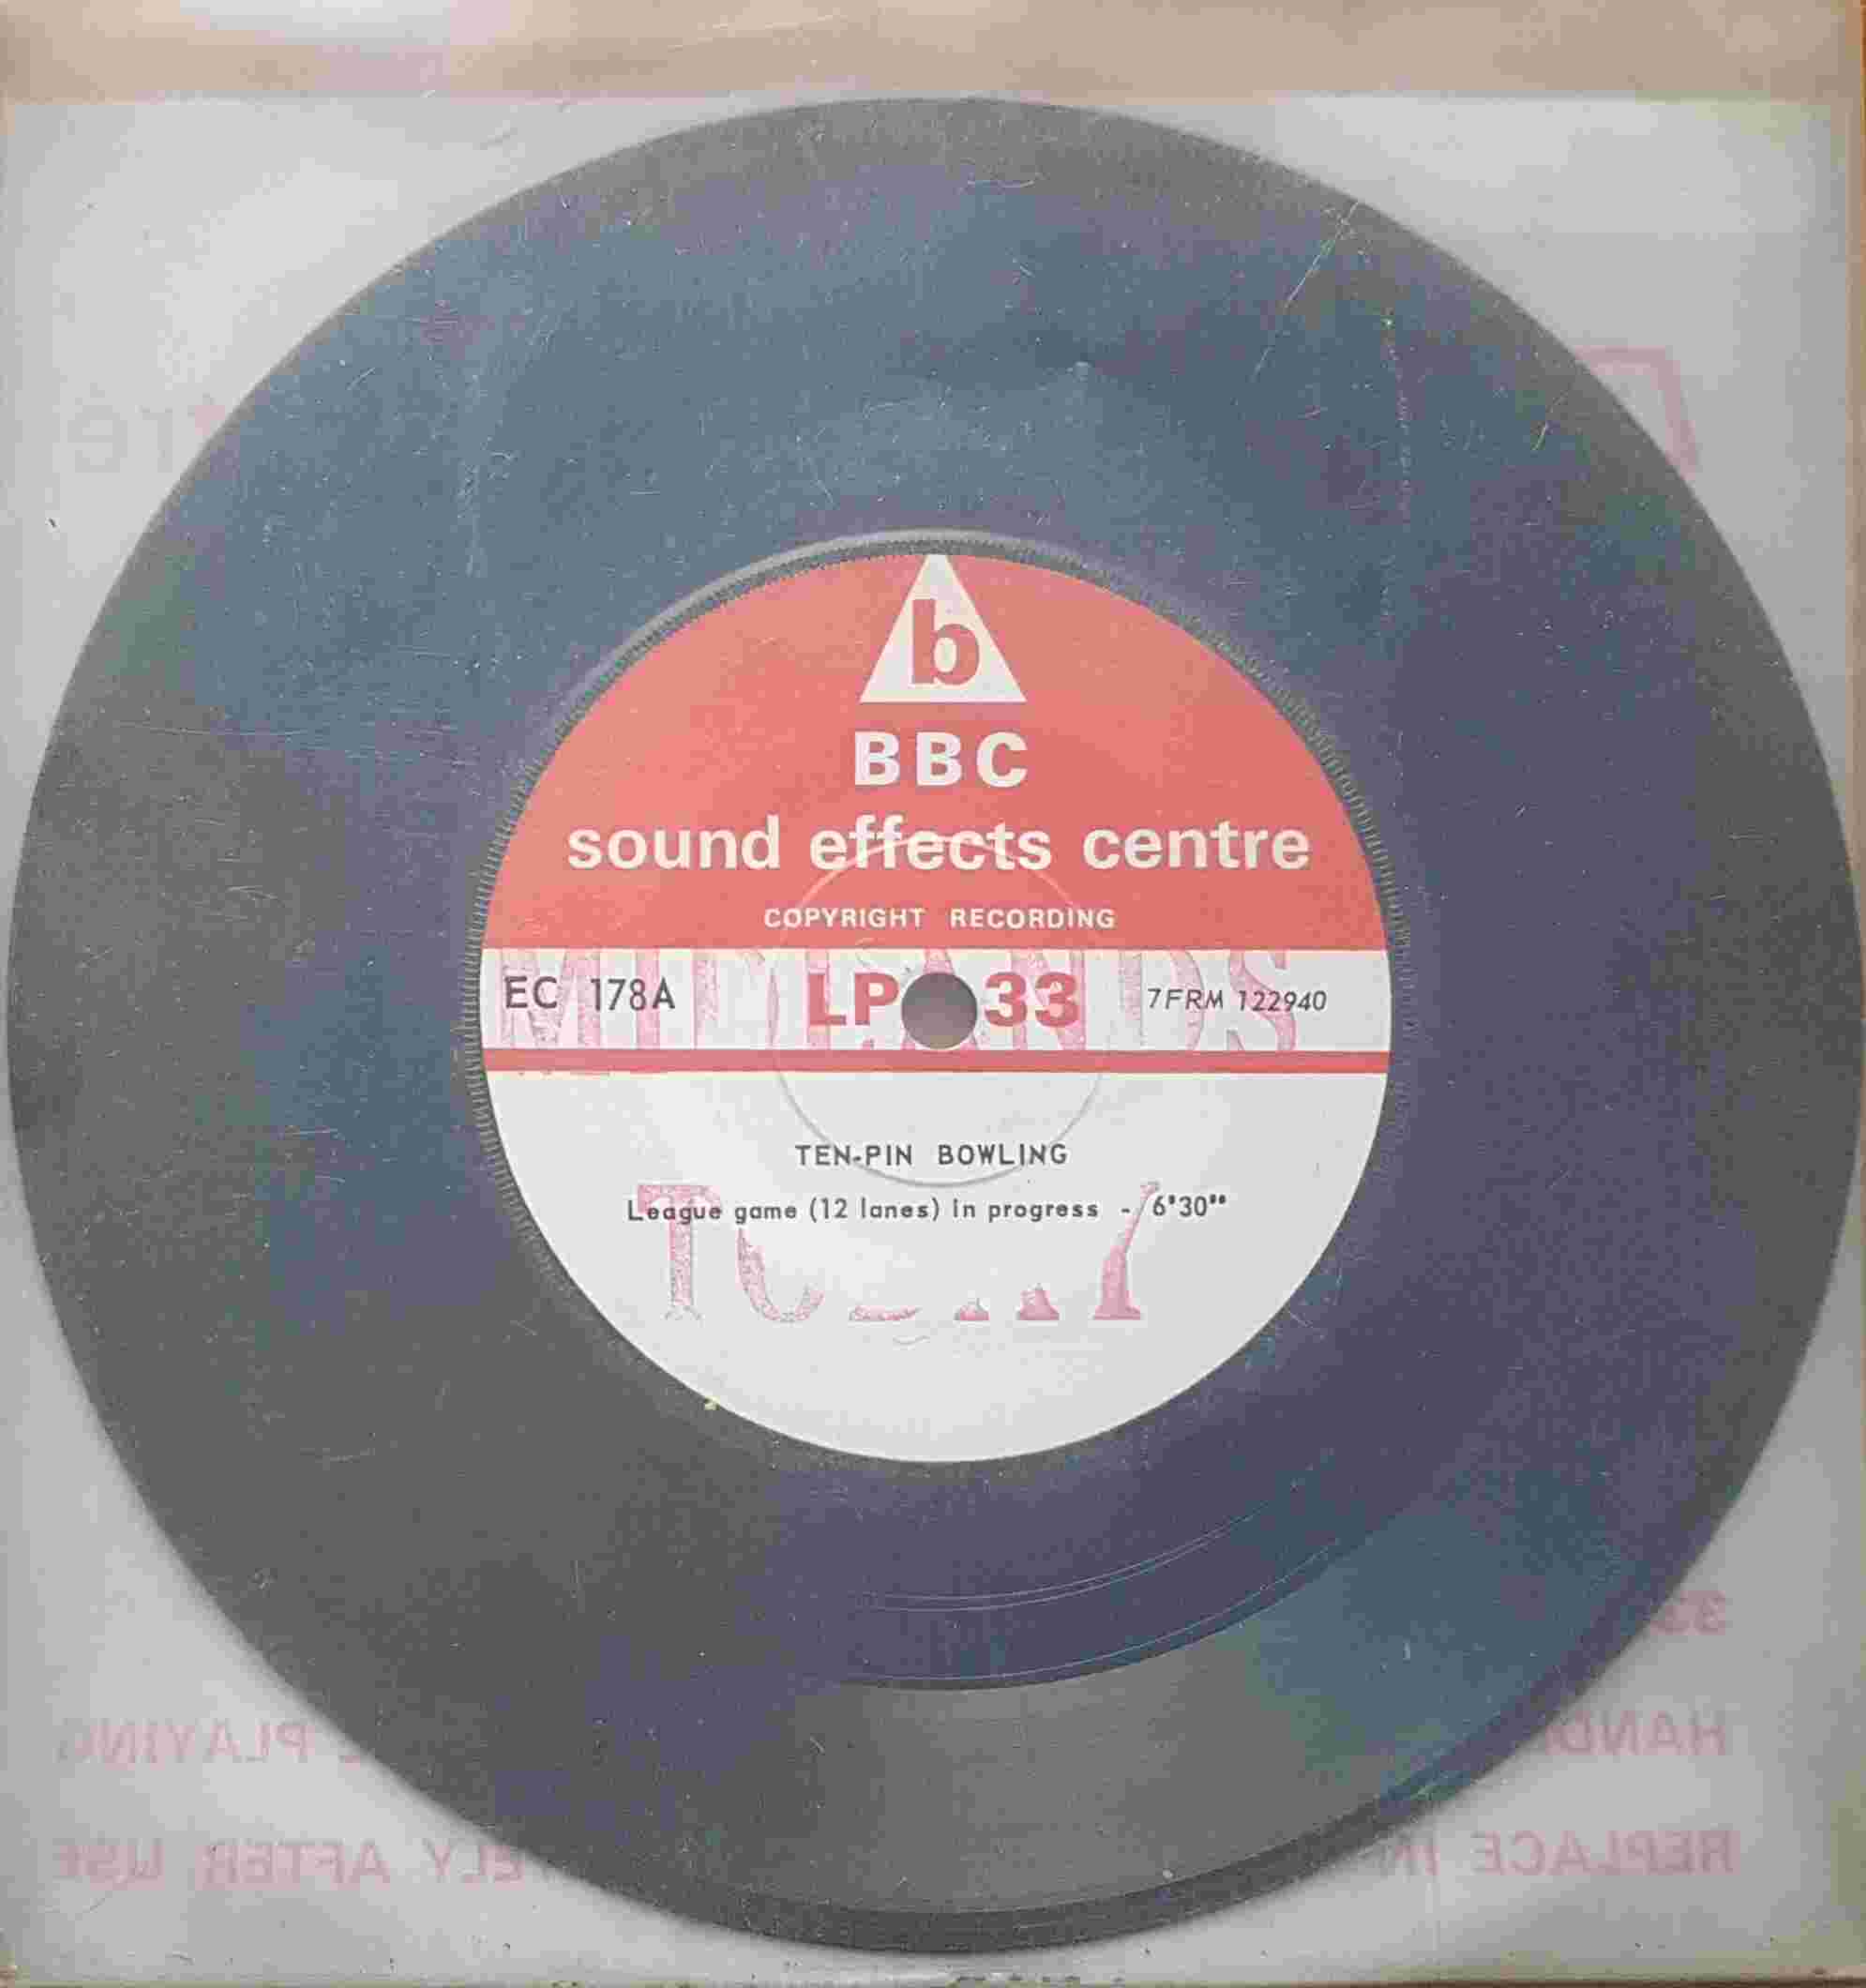 Picture of EC 178A Ten-pin bowling by artist Not registered from the BBC records and Tapes library